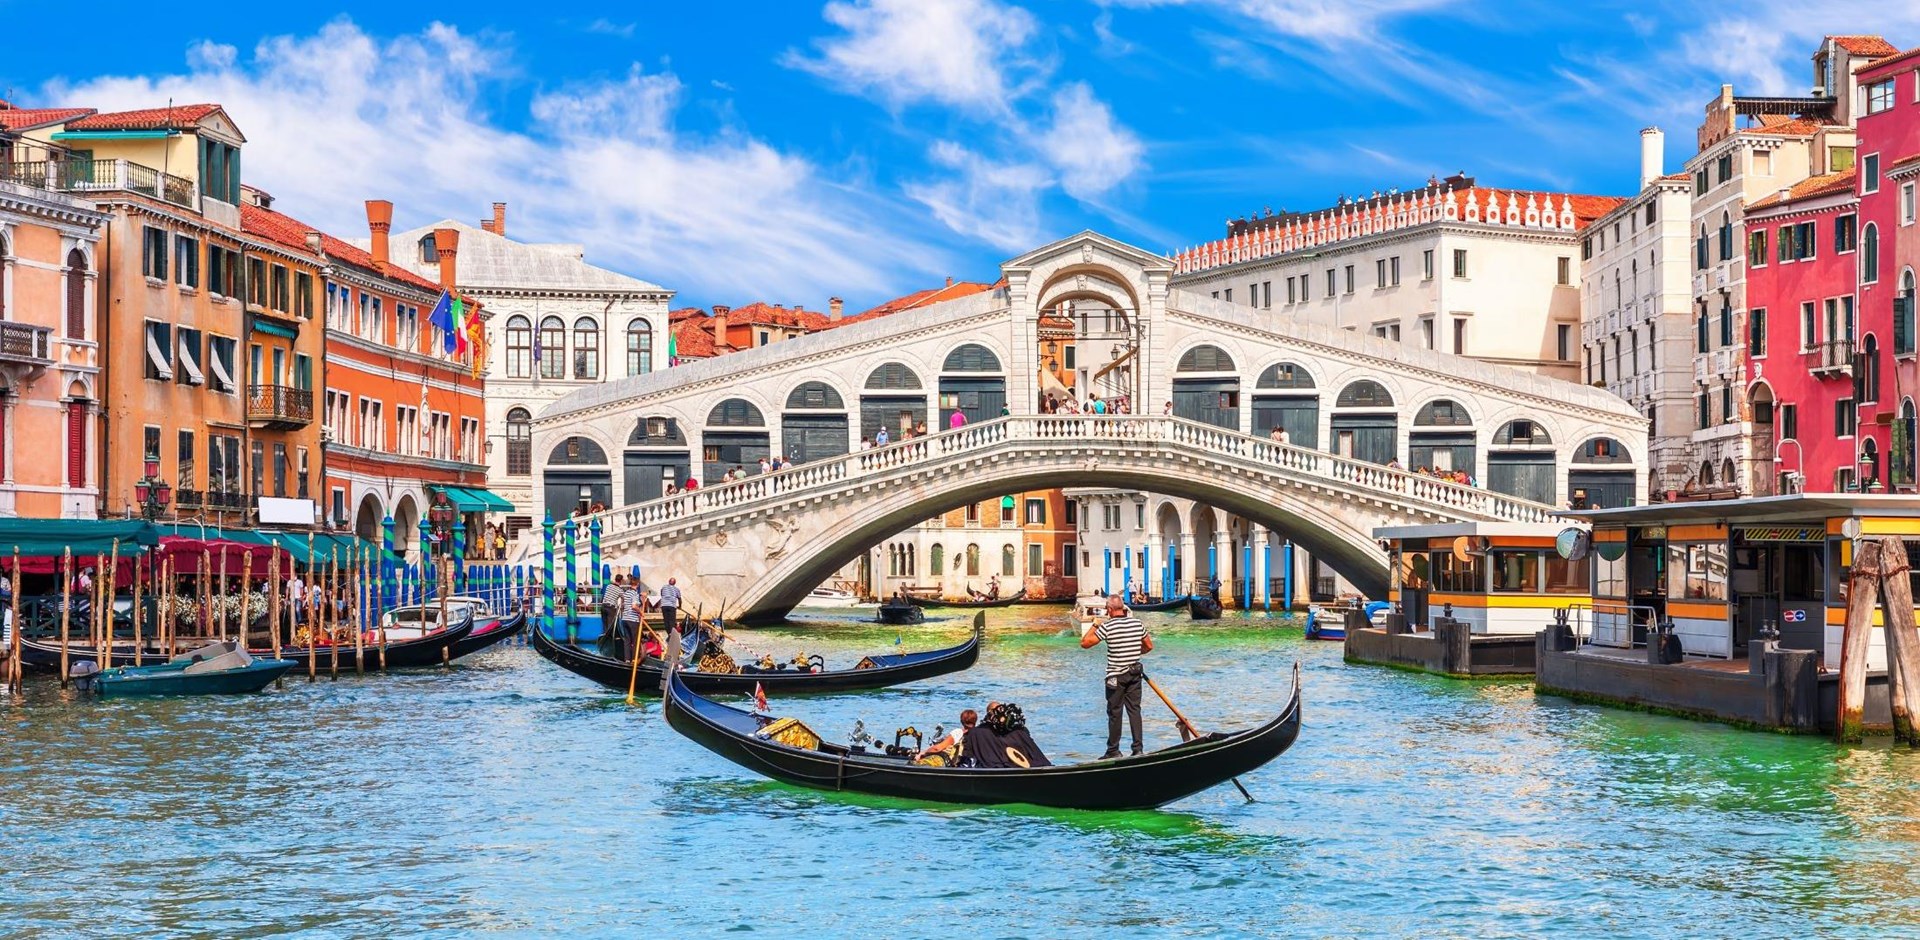 a boat is docked next to a body of water with Rialto Bridge in the background